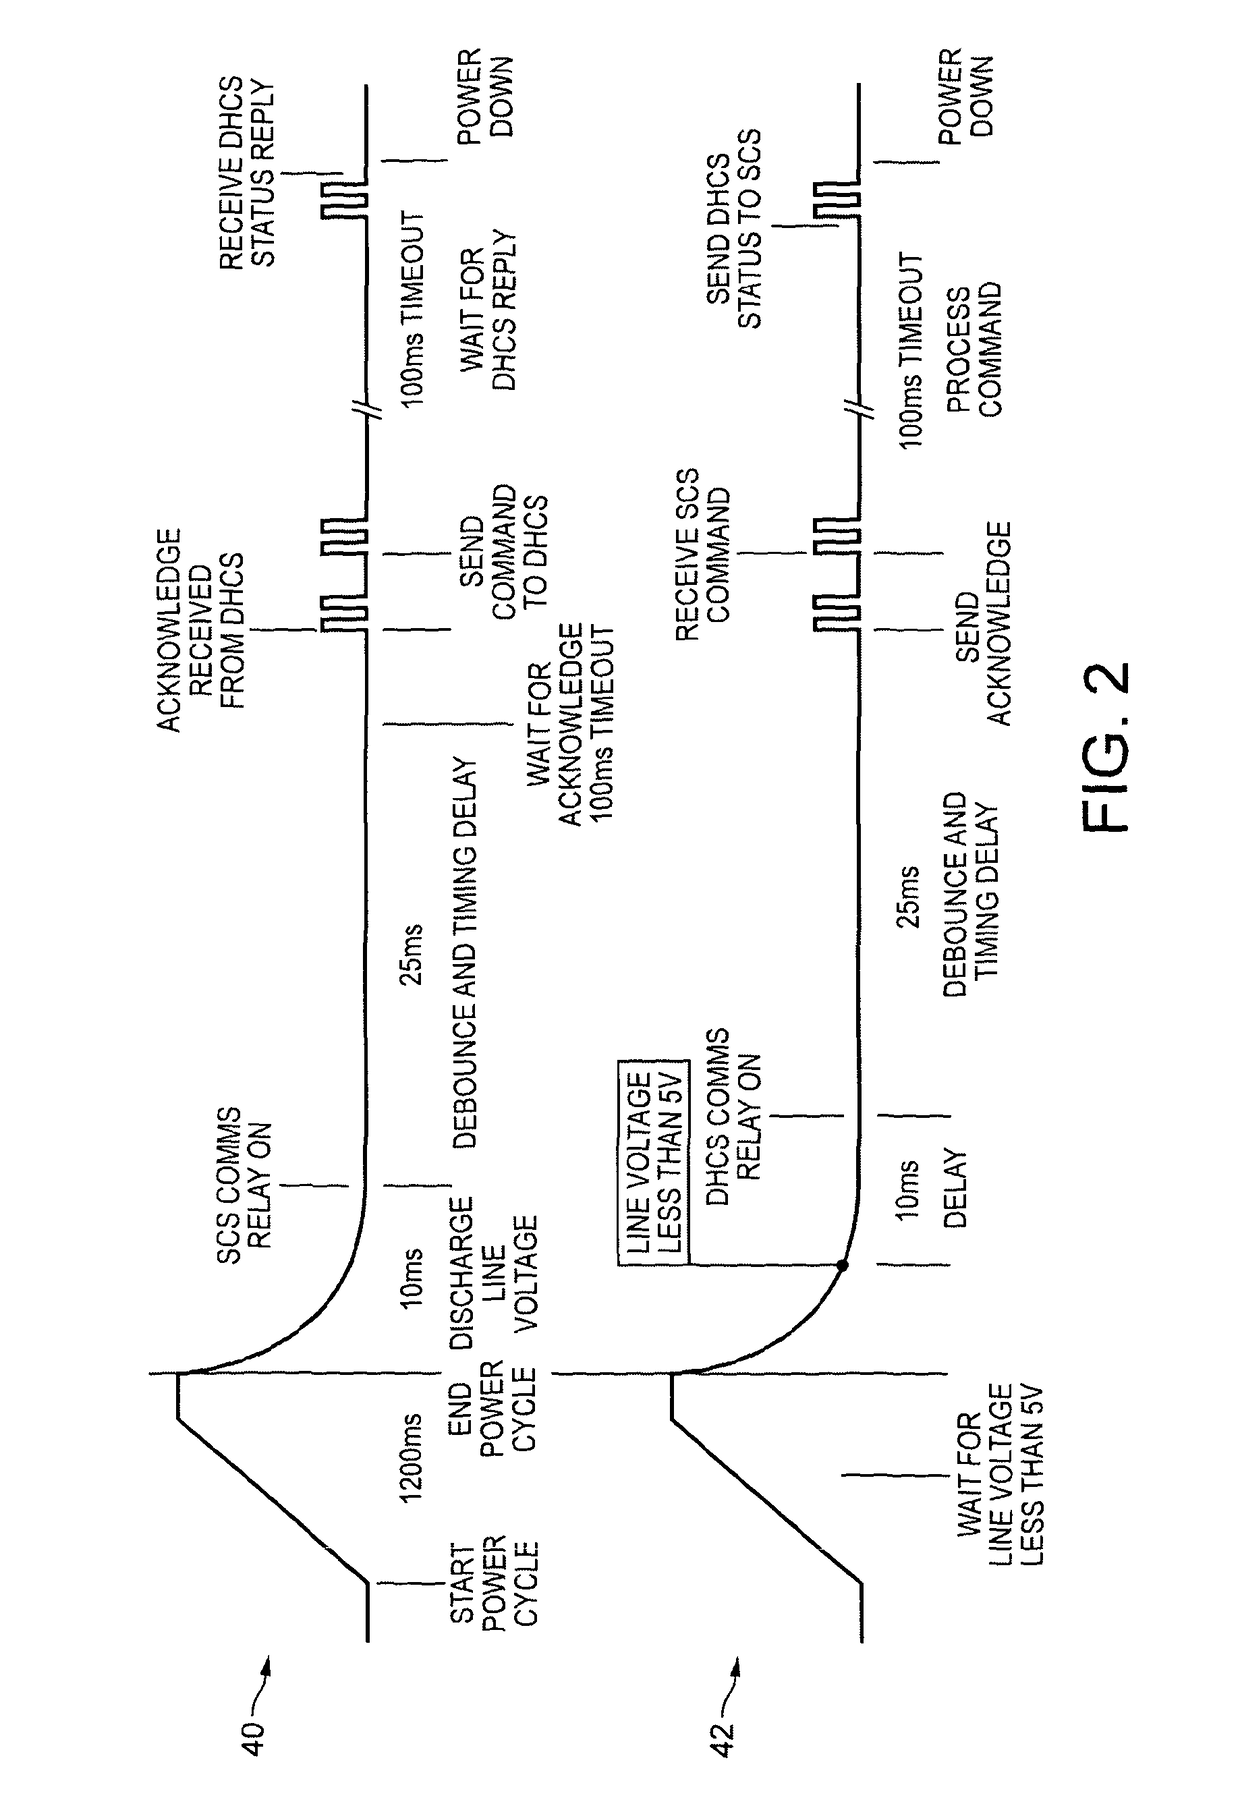 Power and communication assembly for connection to remote electronic devices